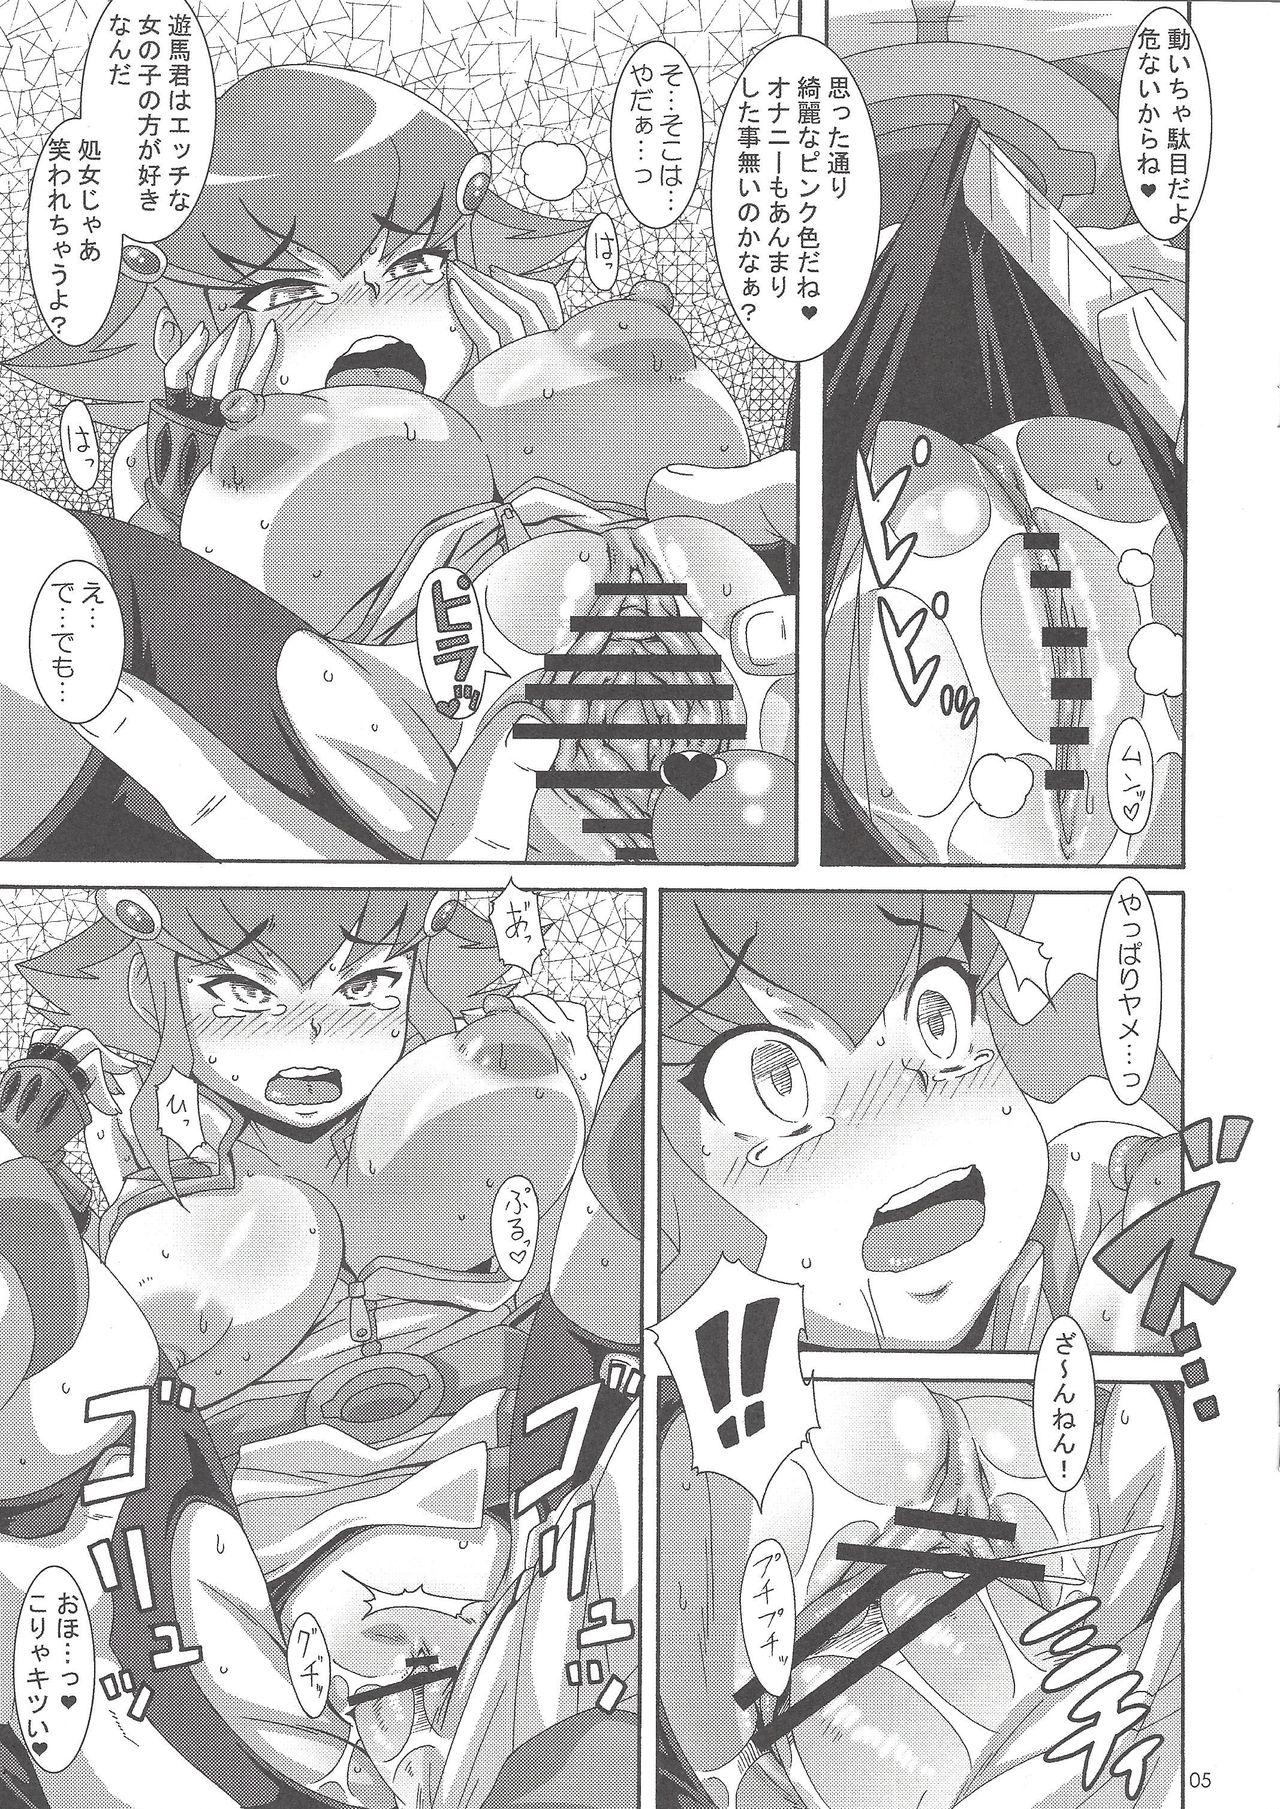 Homemade Anna Koto - Yu-gi-oh zexal Clothed Sex - Page 5